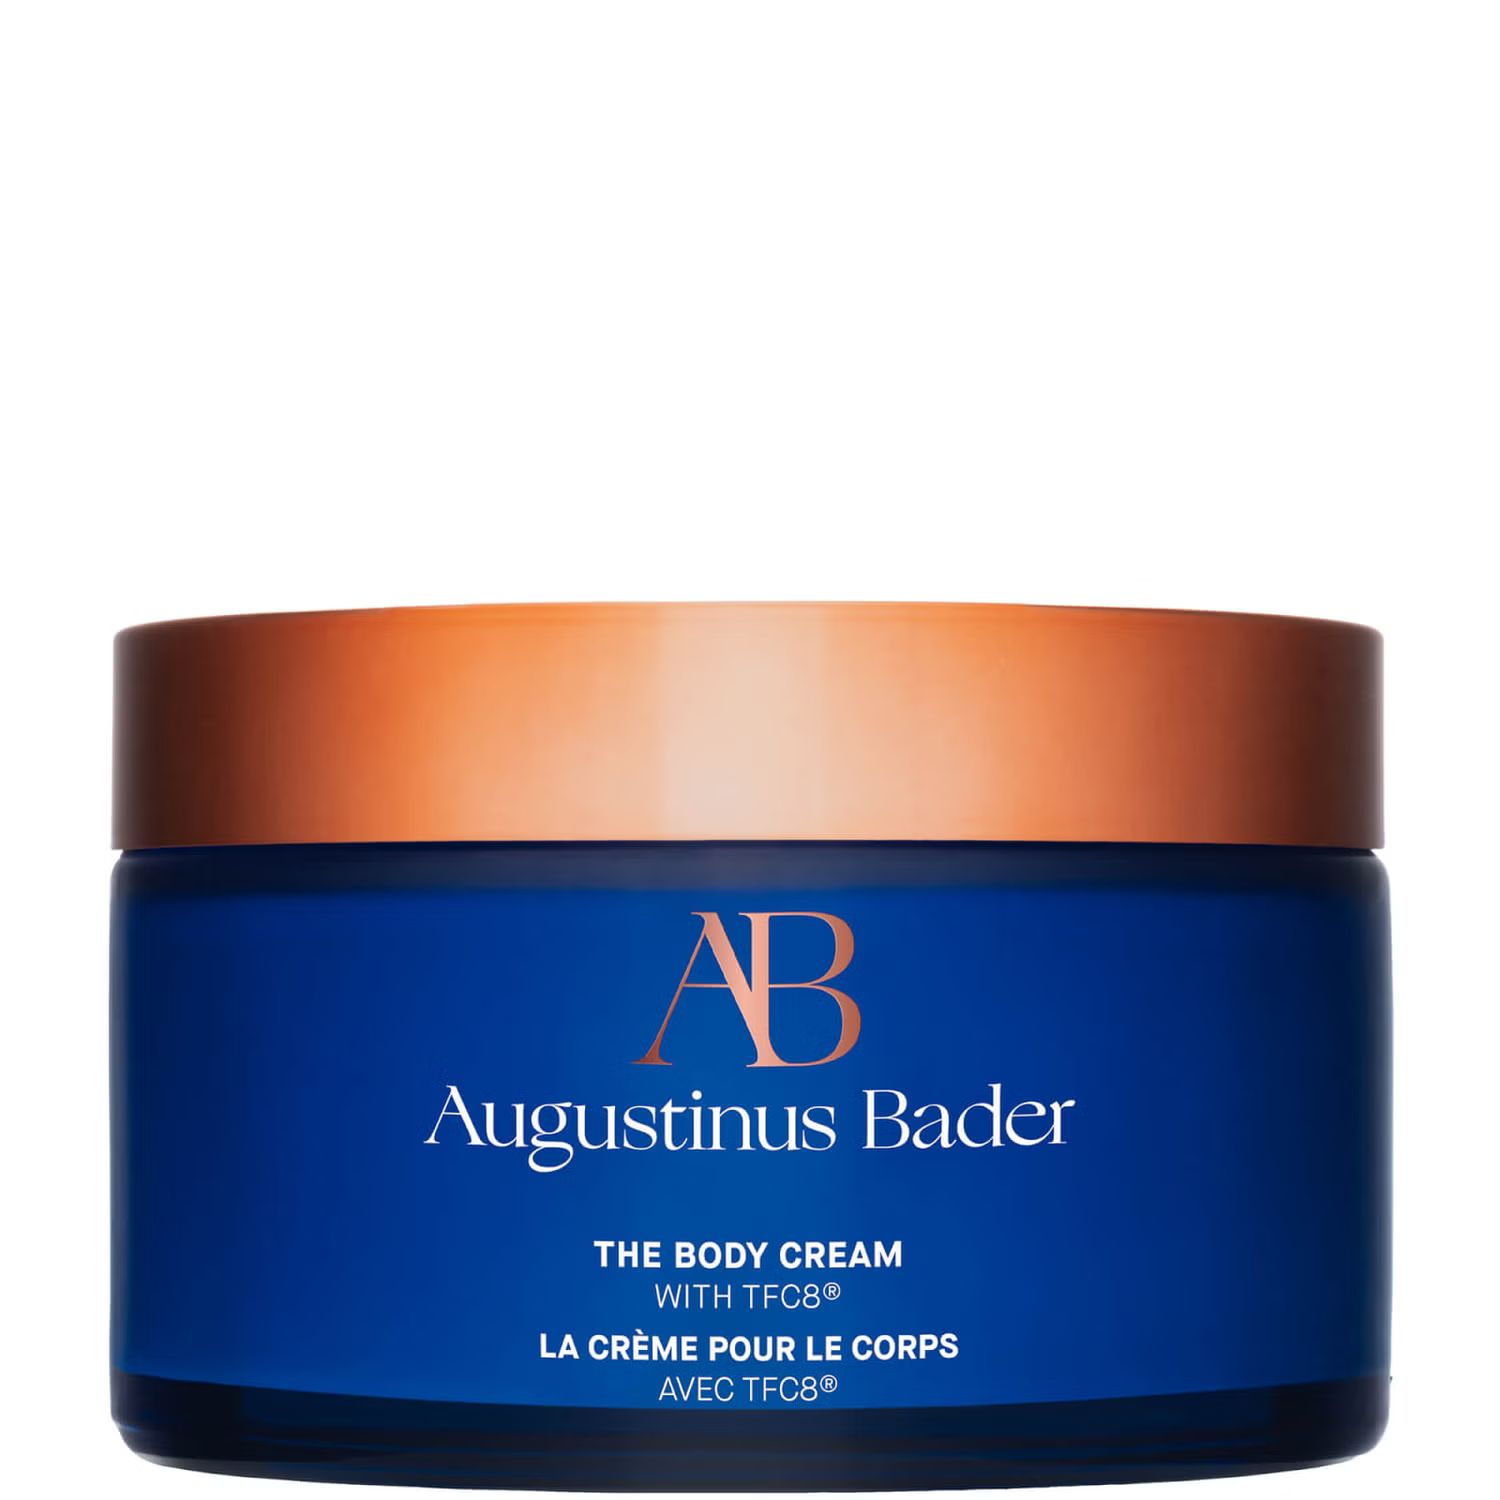 Augustinus Bader The Body Cream 200ml | Cult Beauty